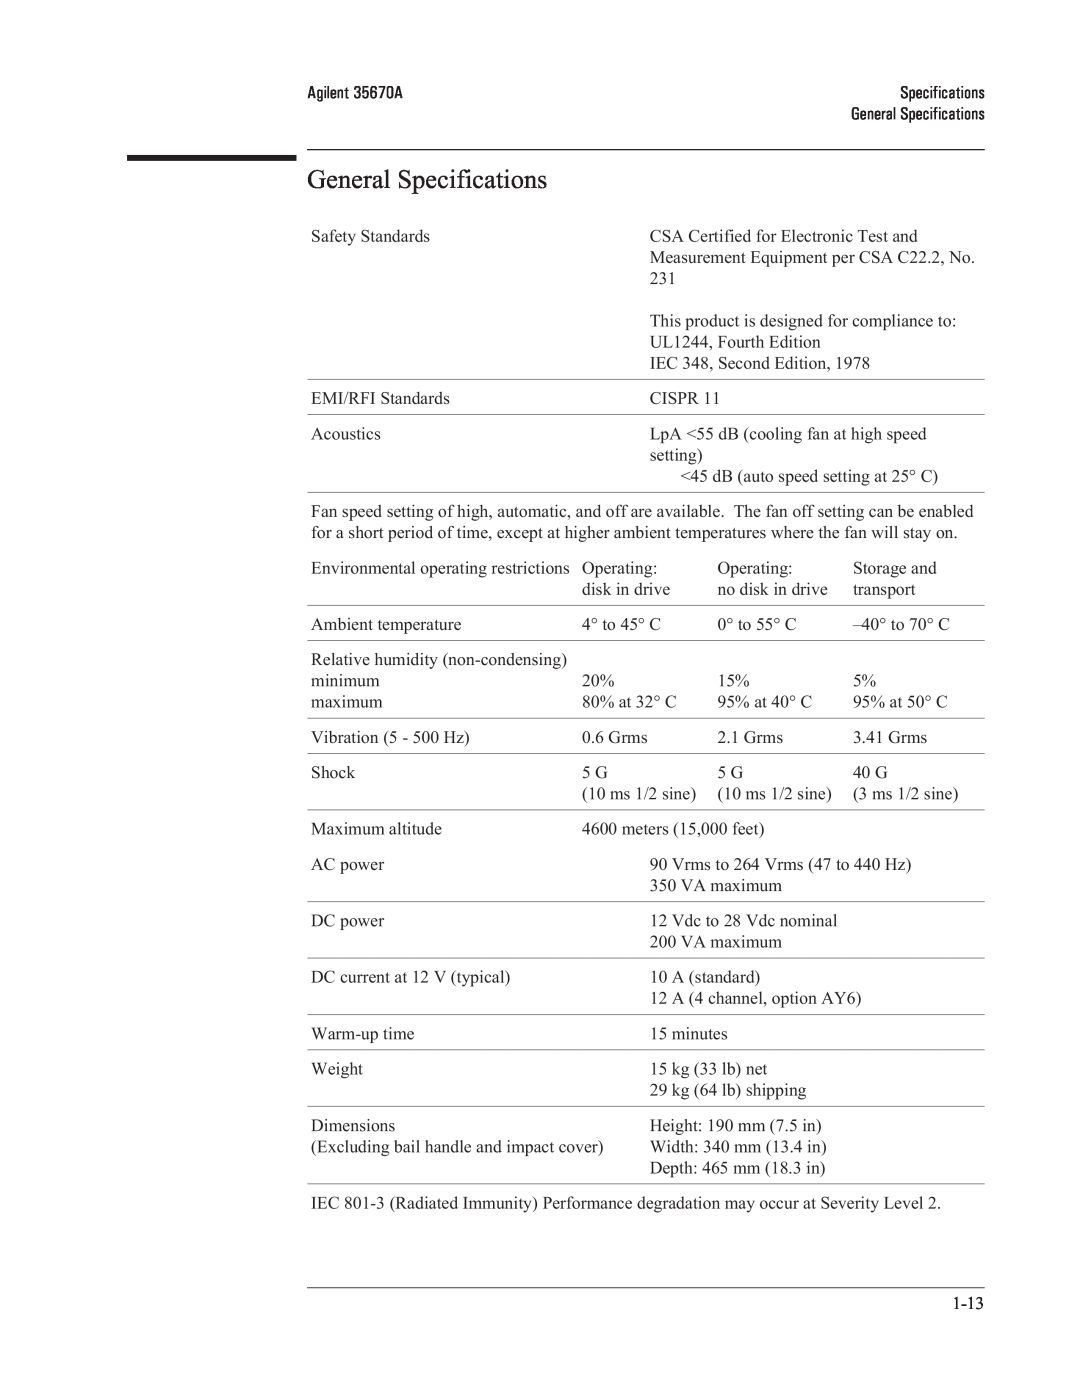 Agilent Technologies 35670-90066 manual General Specifications 